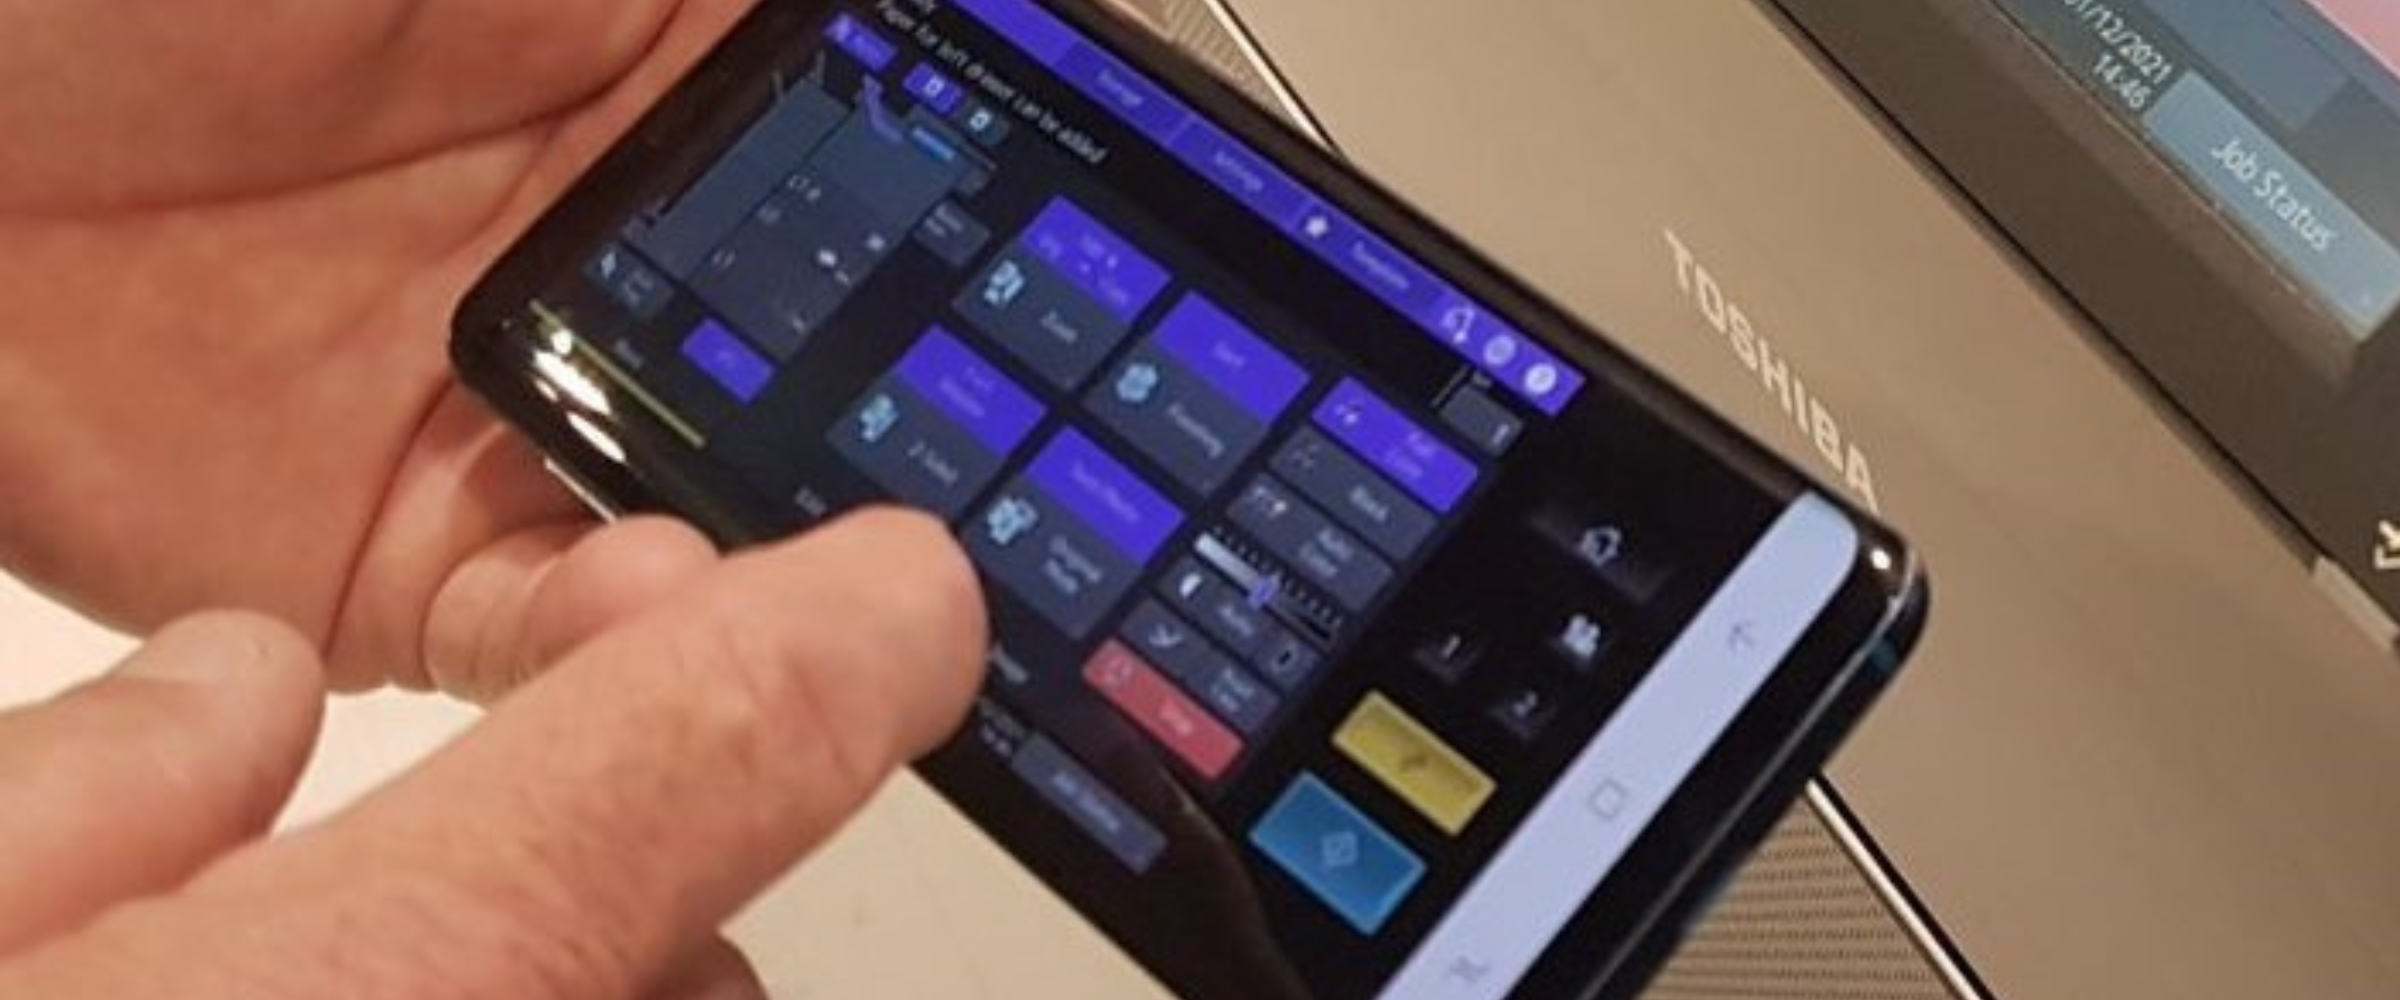 Toshiba's touch free app in action